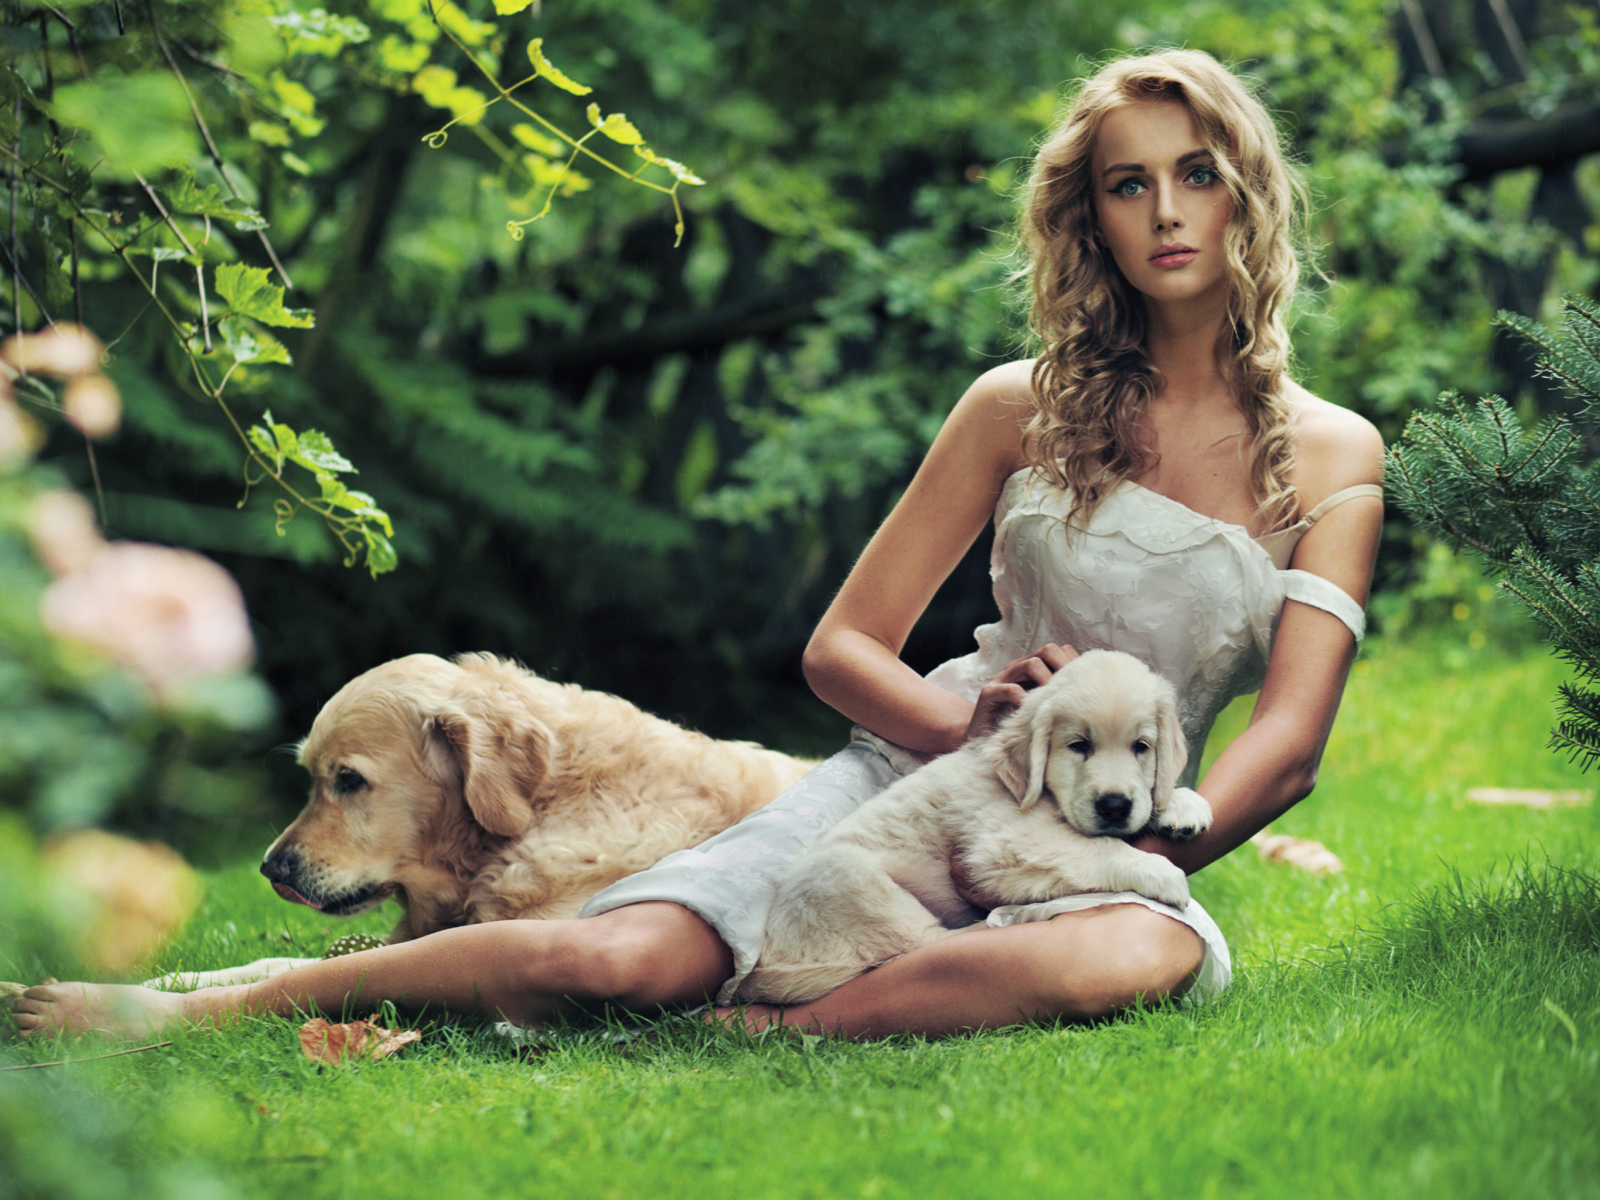 Das Model And Dogs Wallpaper 1600x1200